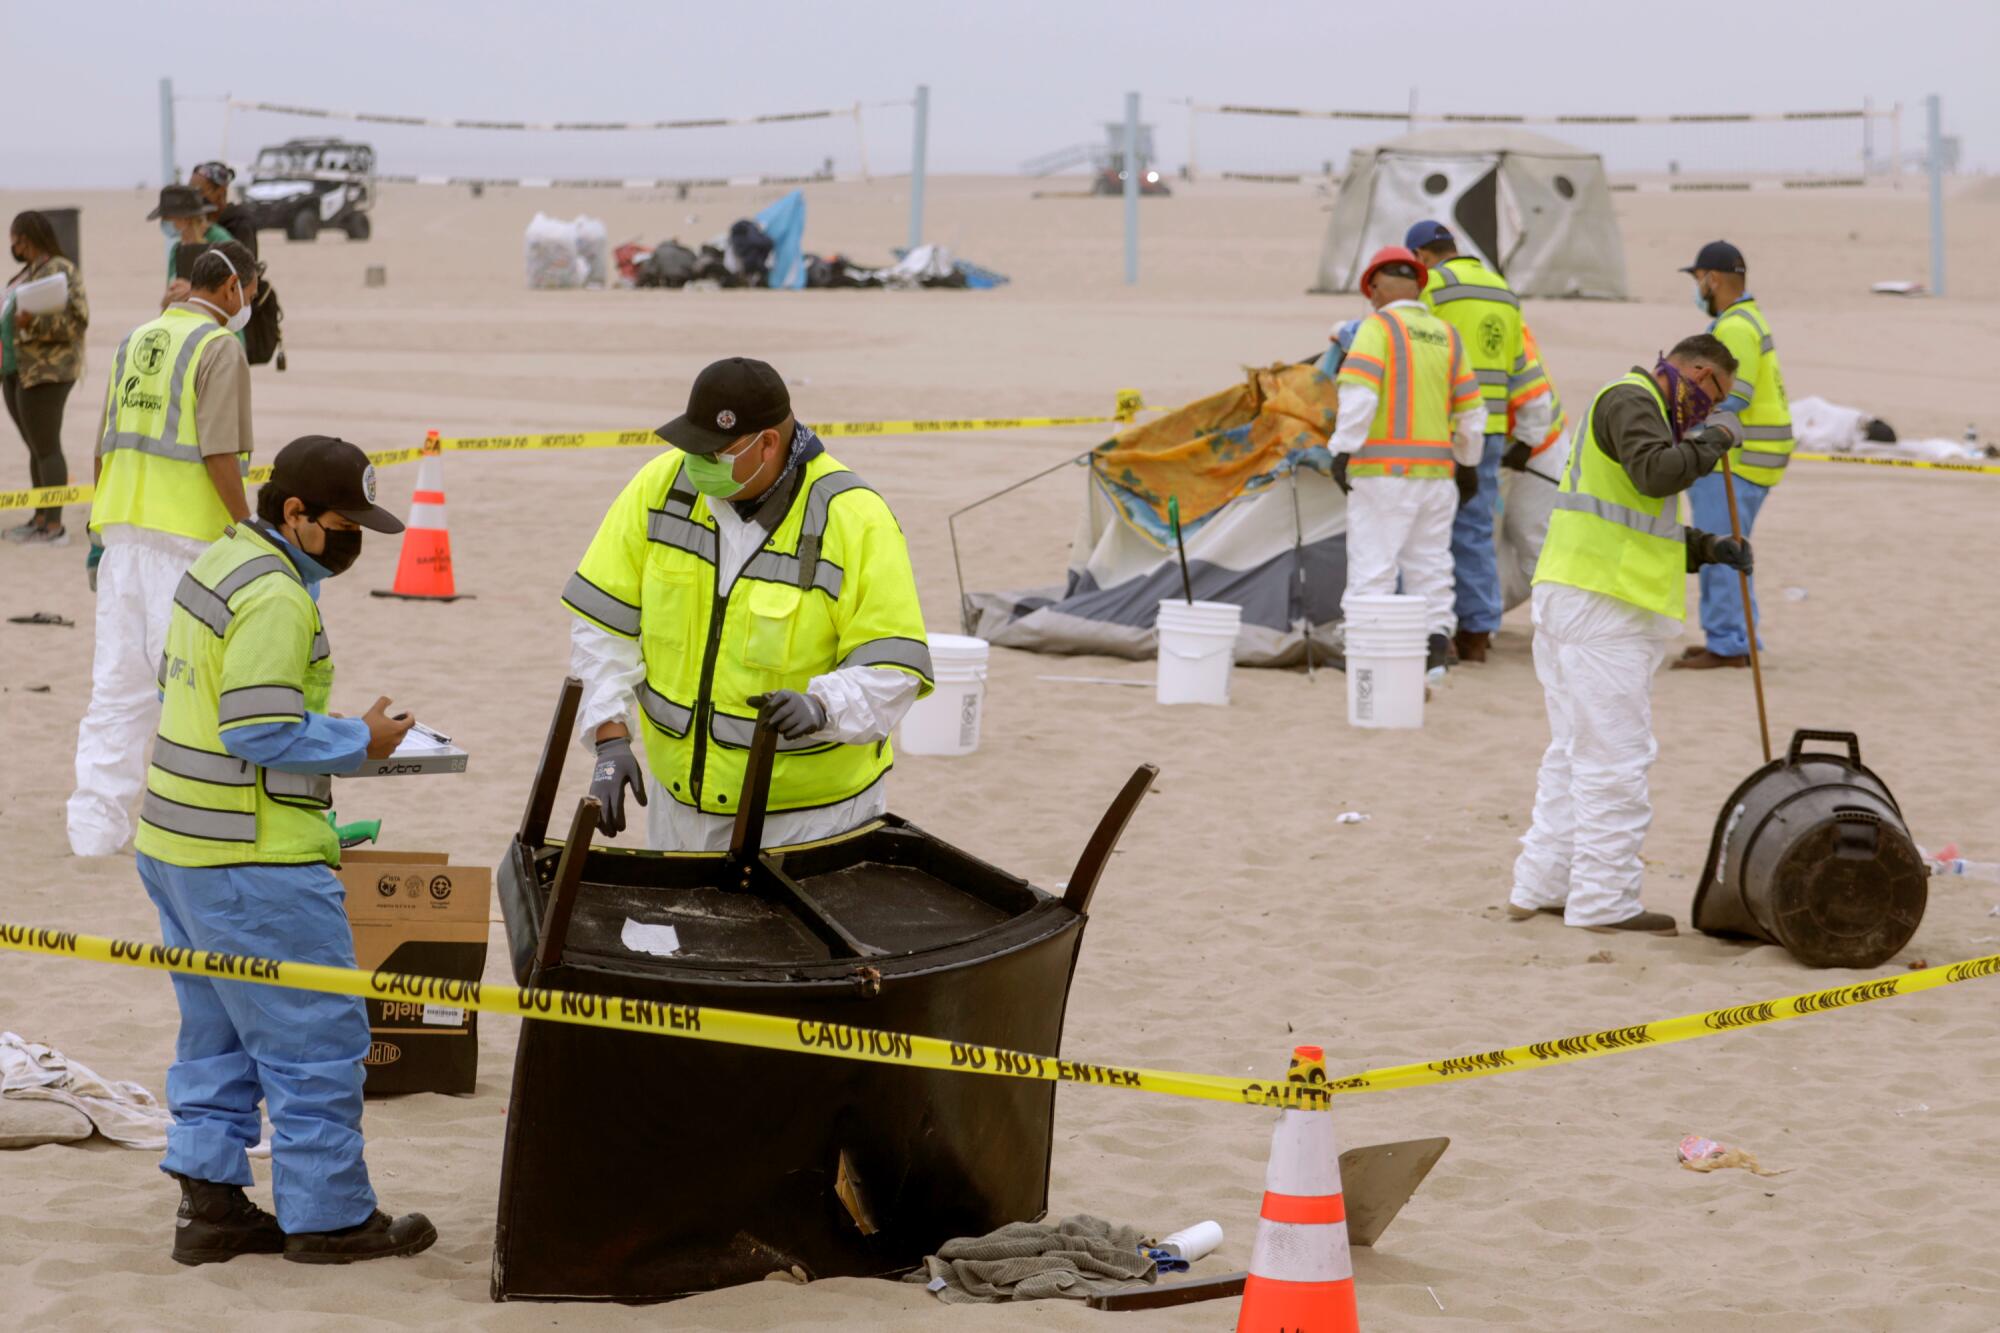 City of Los Angeles sanitation workers clear homeless encampments on the beach in Venice in July.